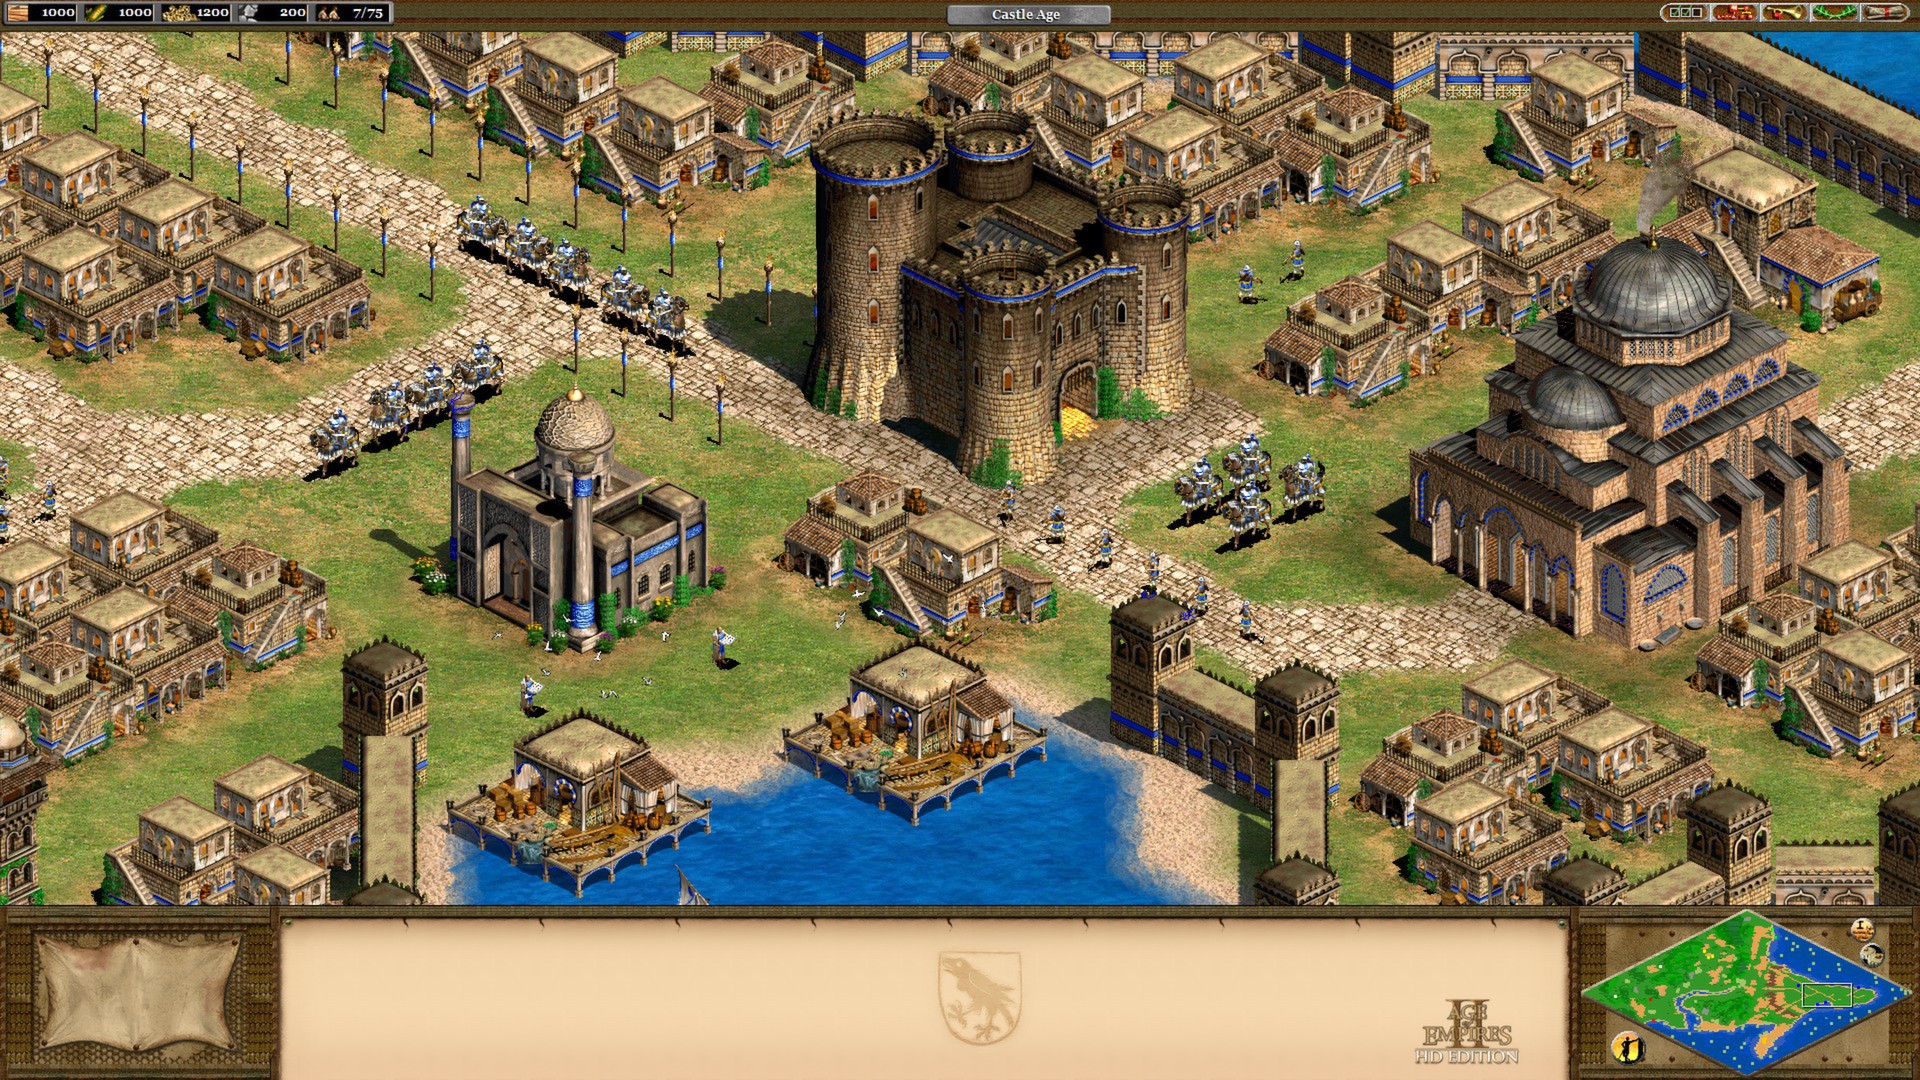 Age, Age of Empires, Age of Empires 2, City, Medieval, Age of Kings, Game, RTS